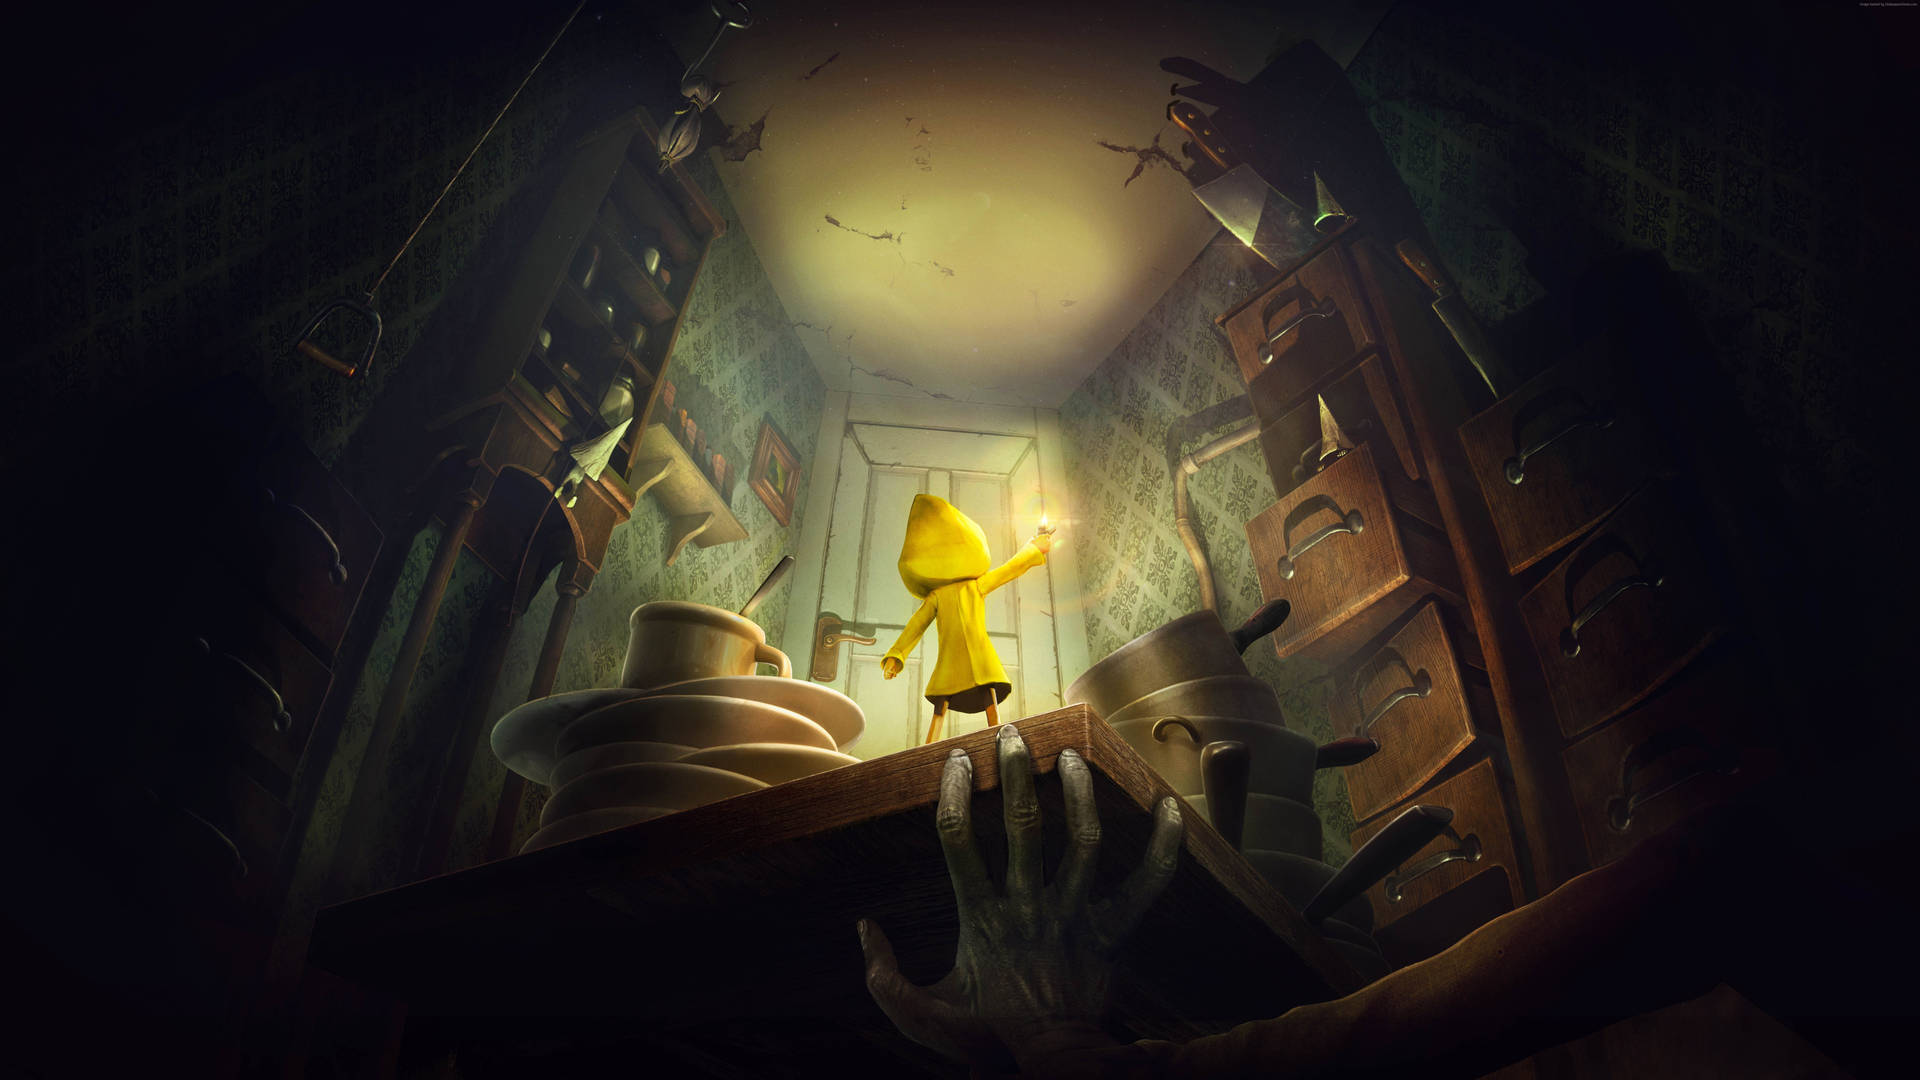 Top 999+ Little Nightmares Wallpaper Full HD, 4K✅Free to Use